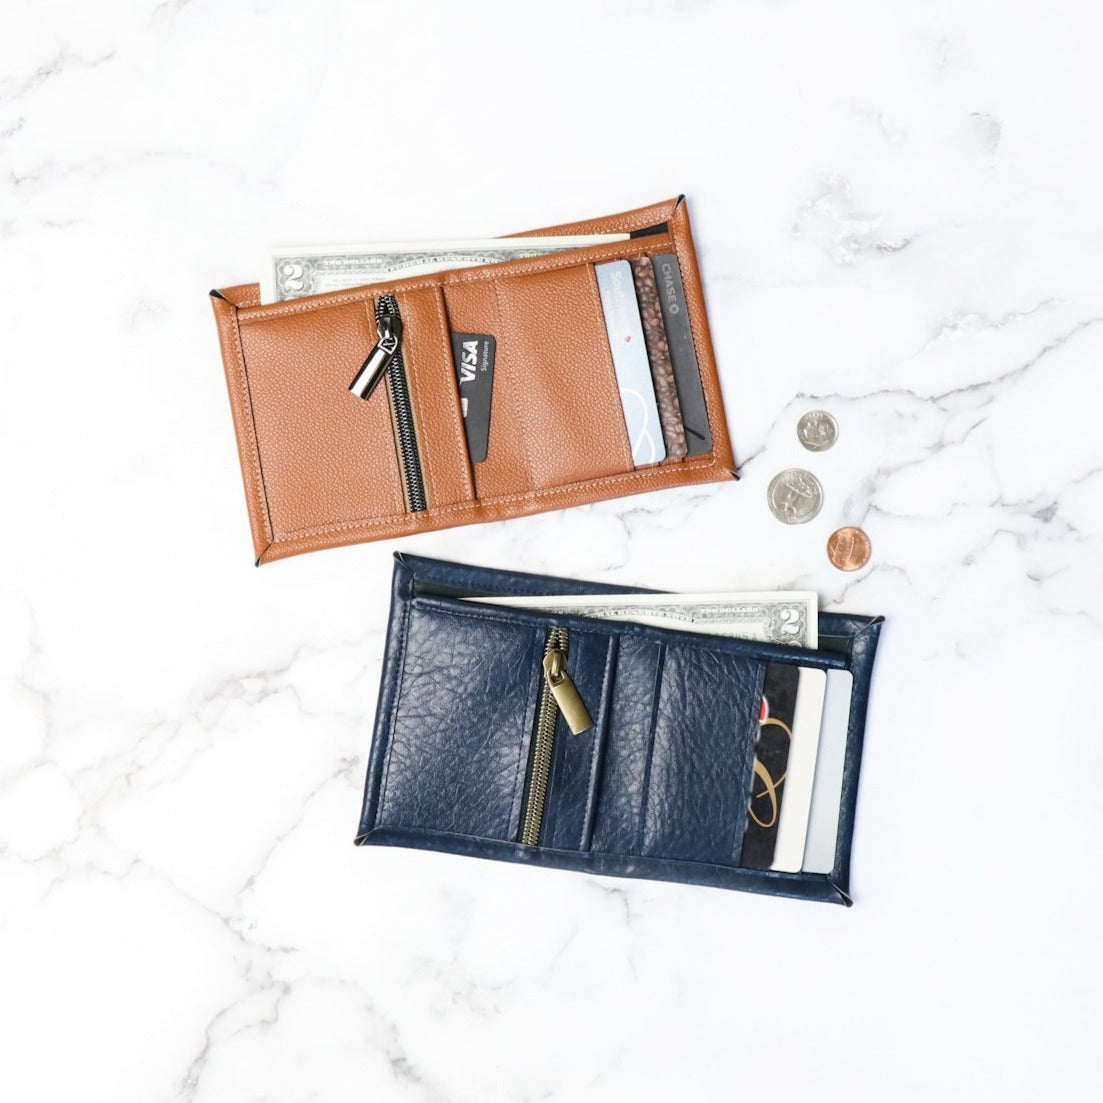 Lucky $2 Wallet Kits